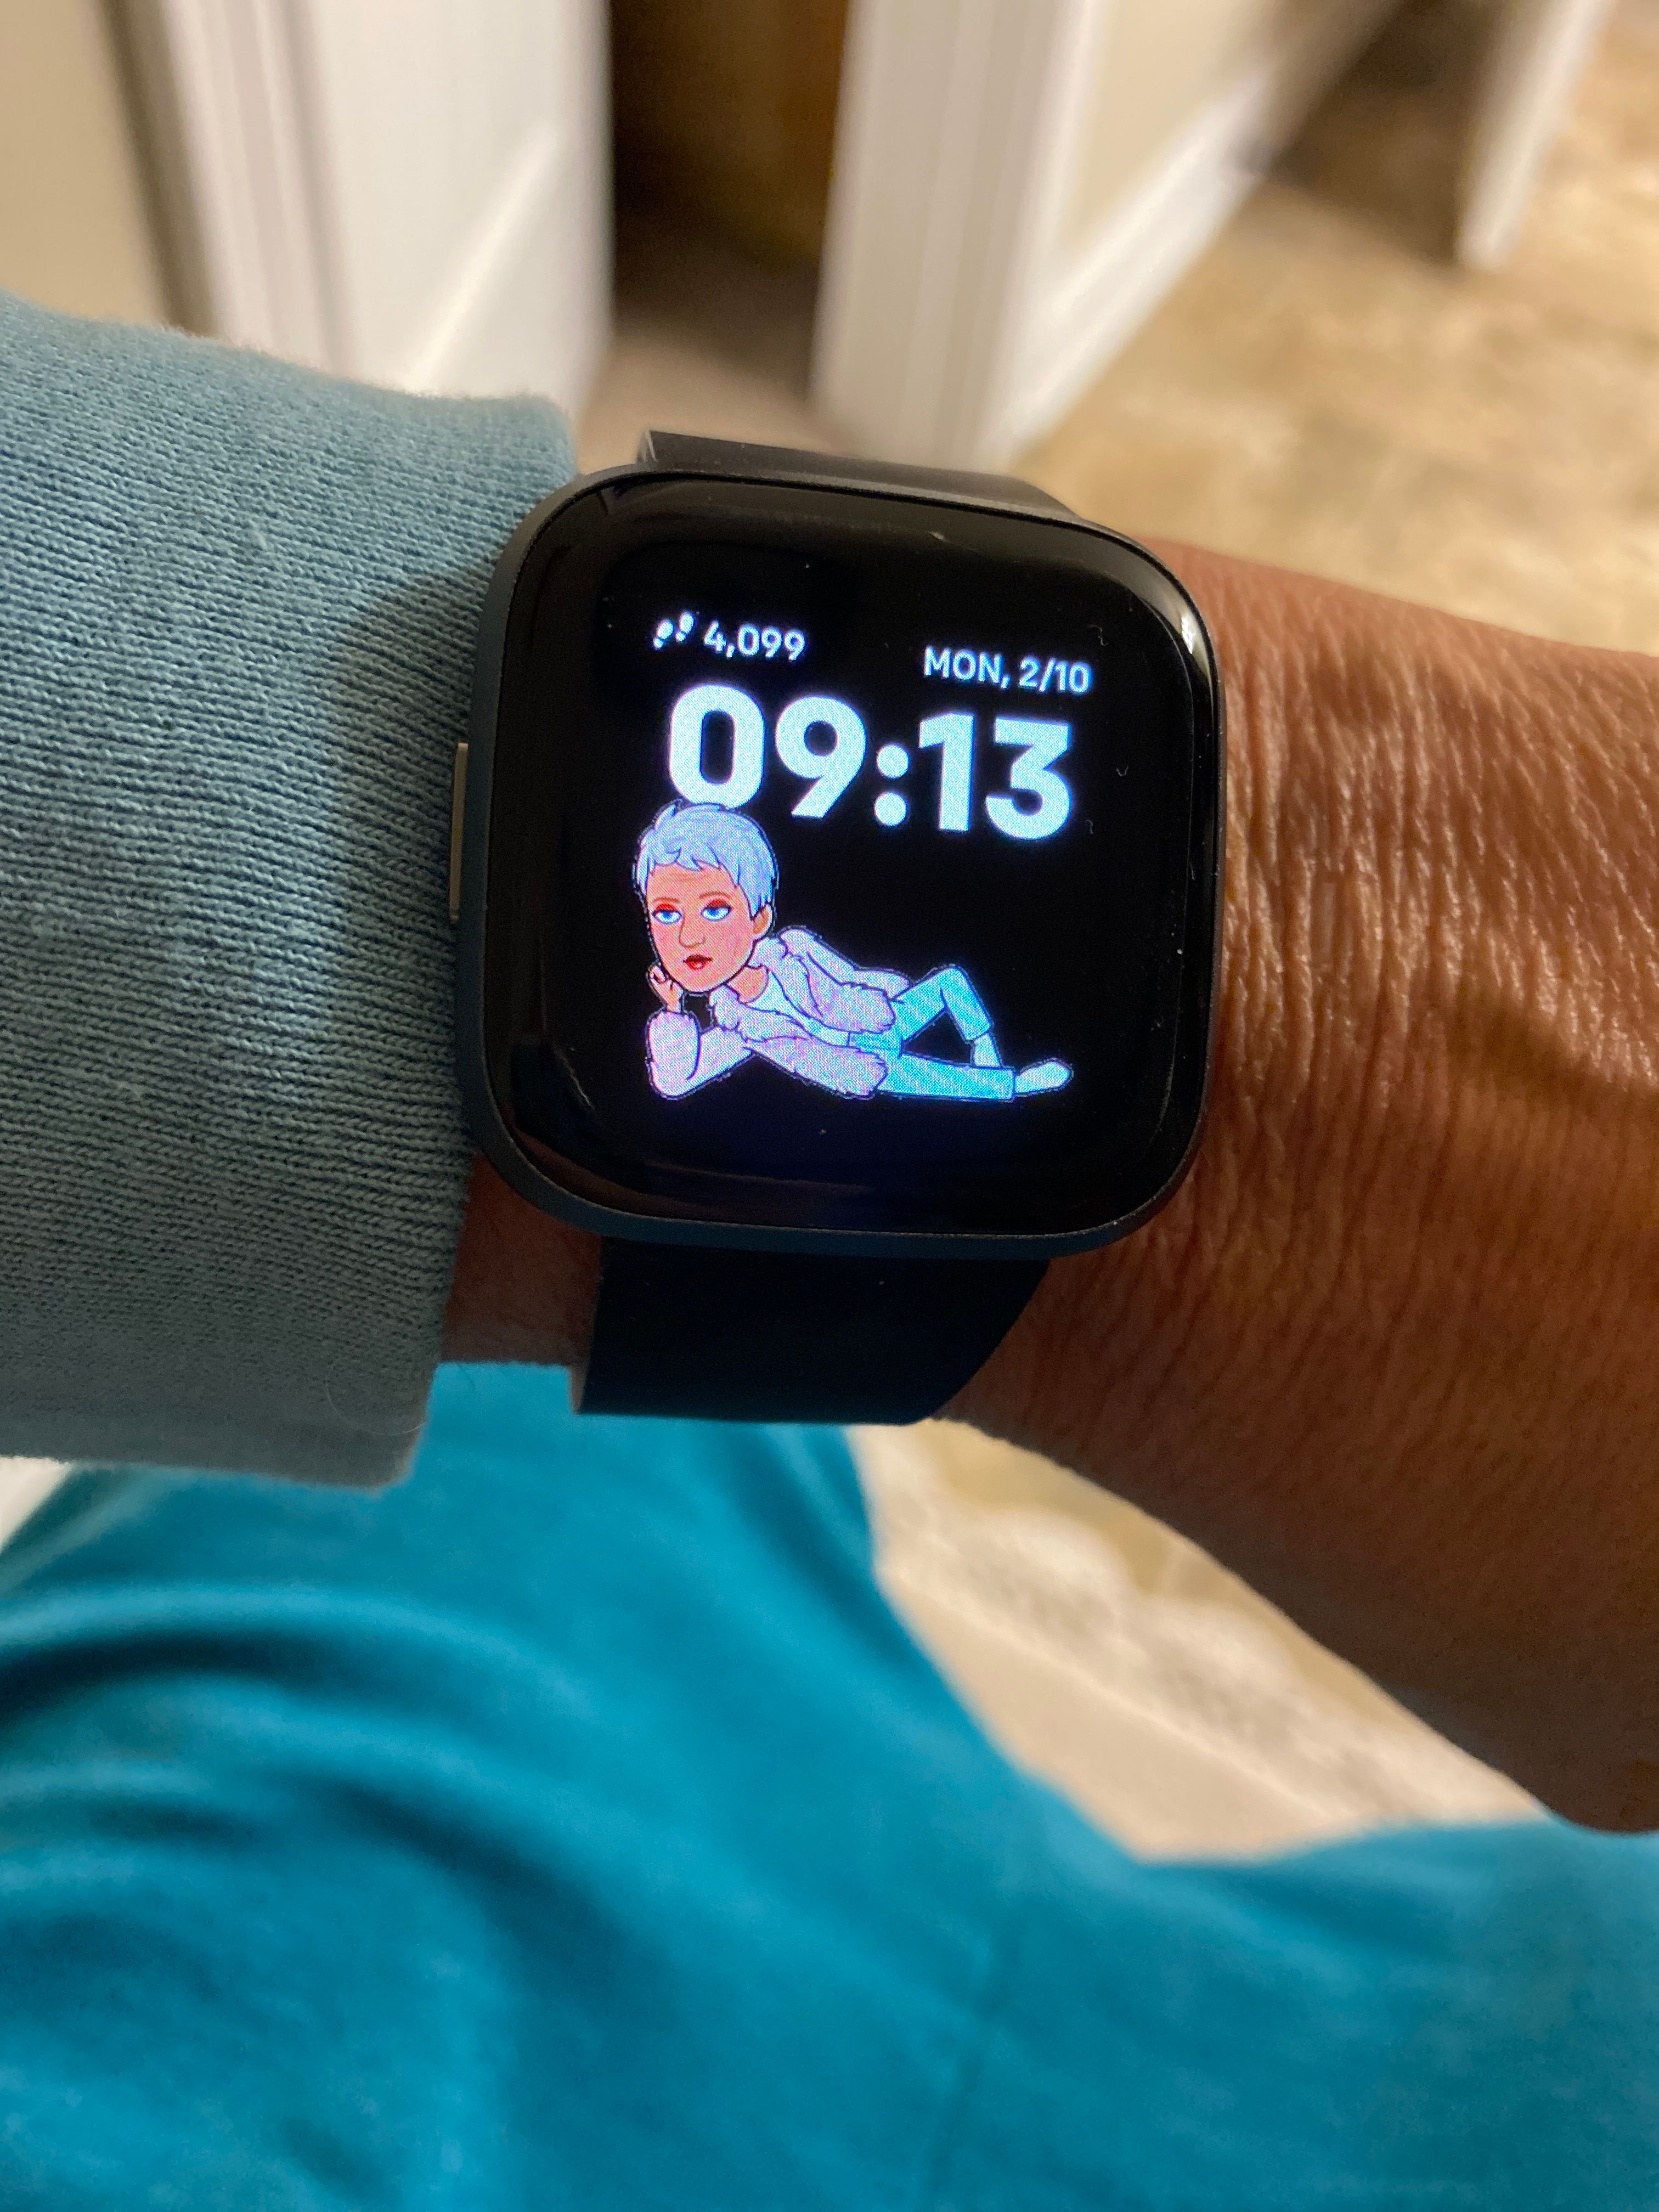 fitbit blaze keeps vibrating after answering call